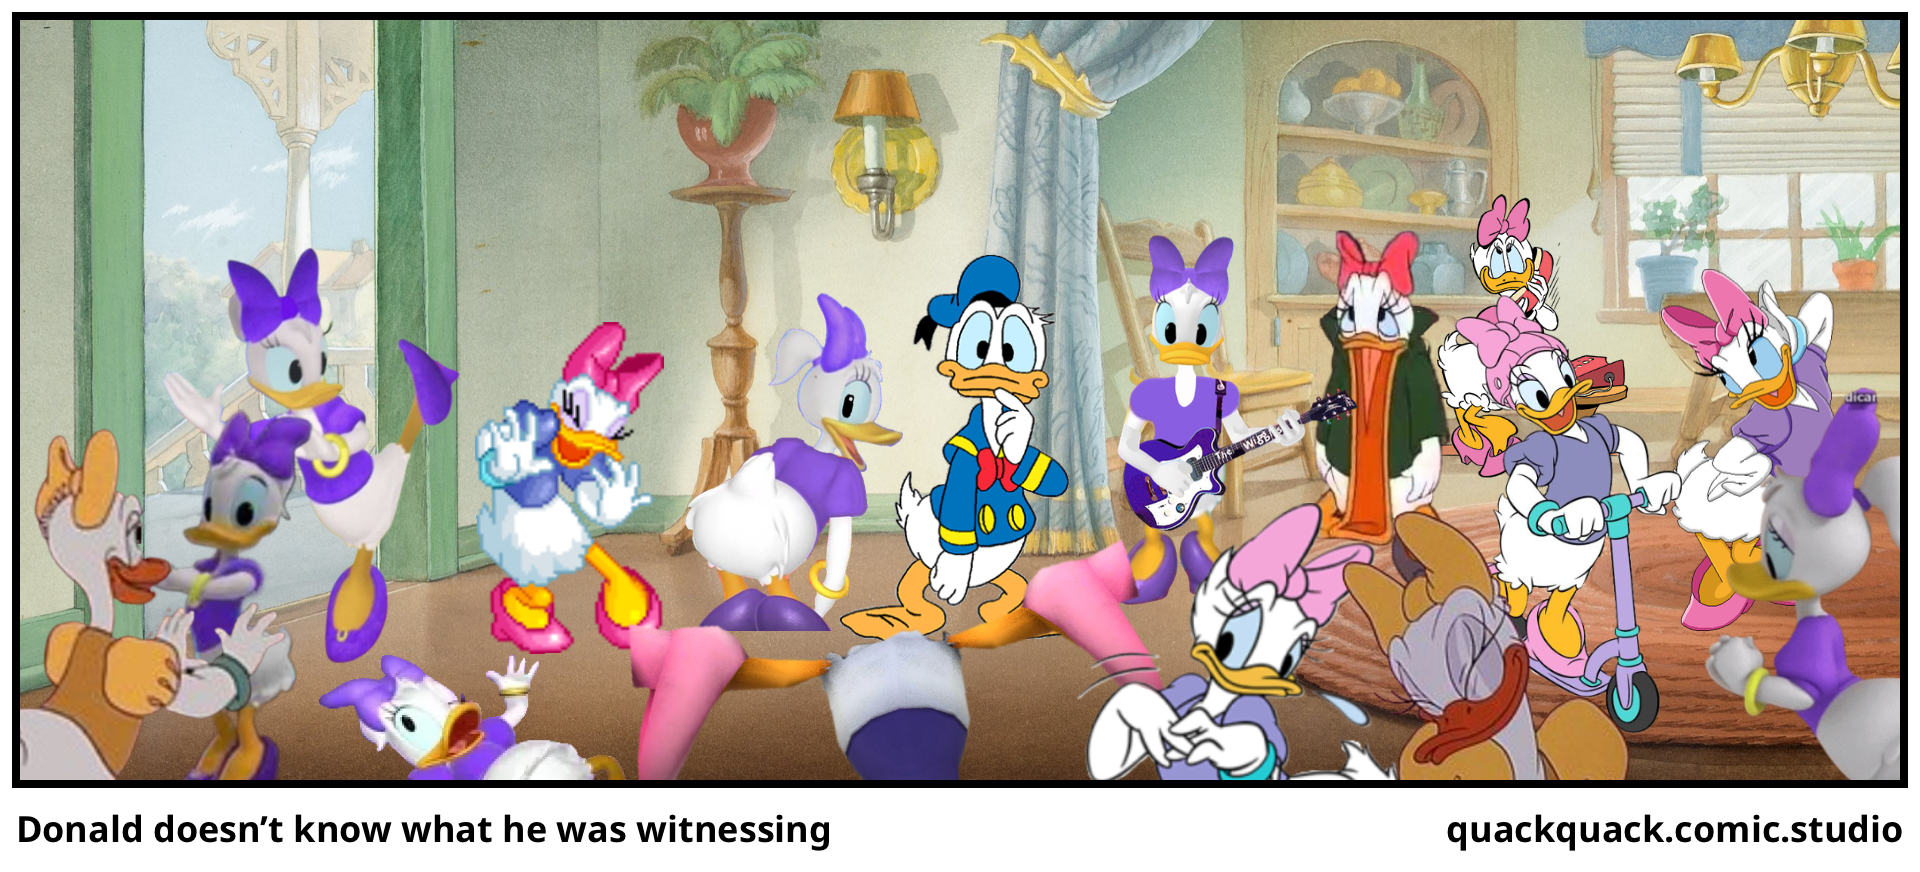 Donald doesn’t know what he was witnessing 